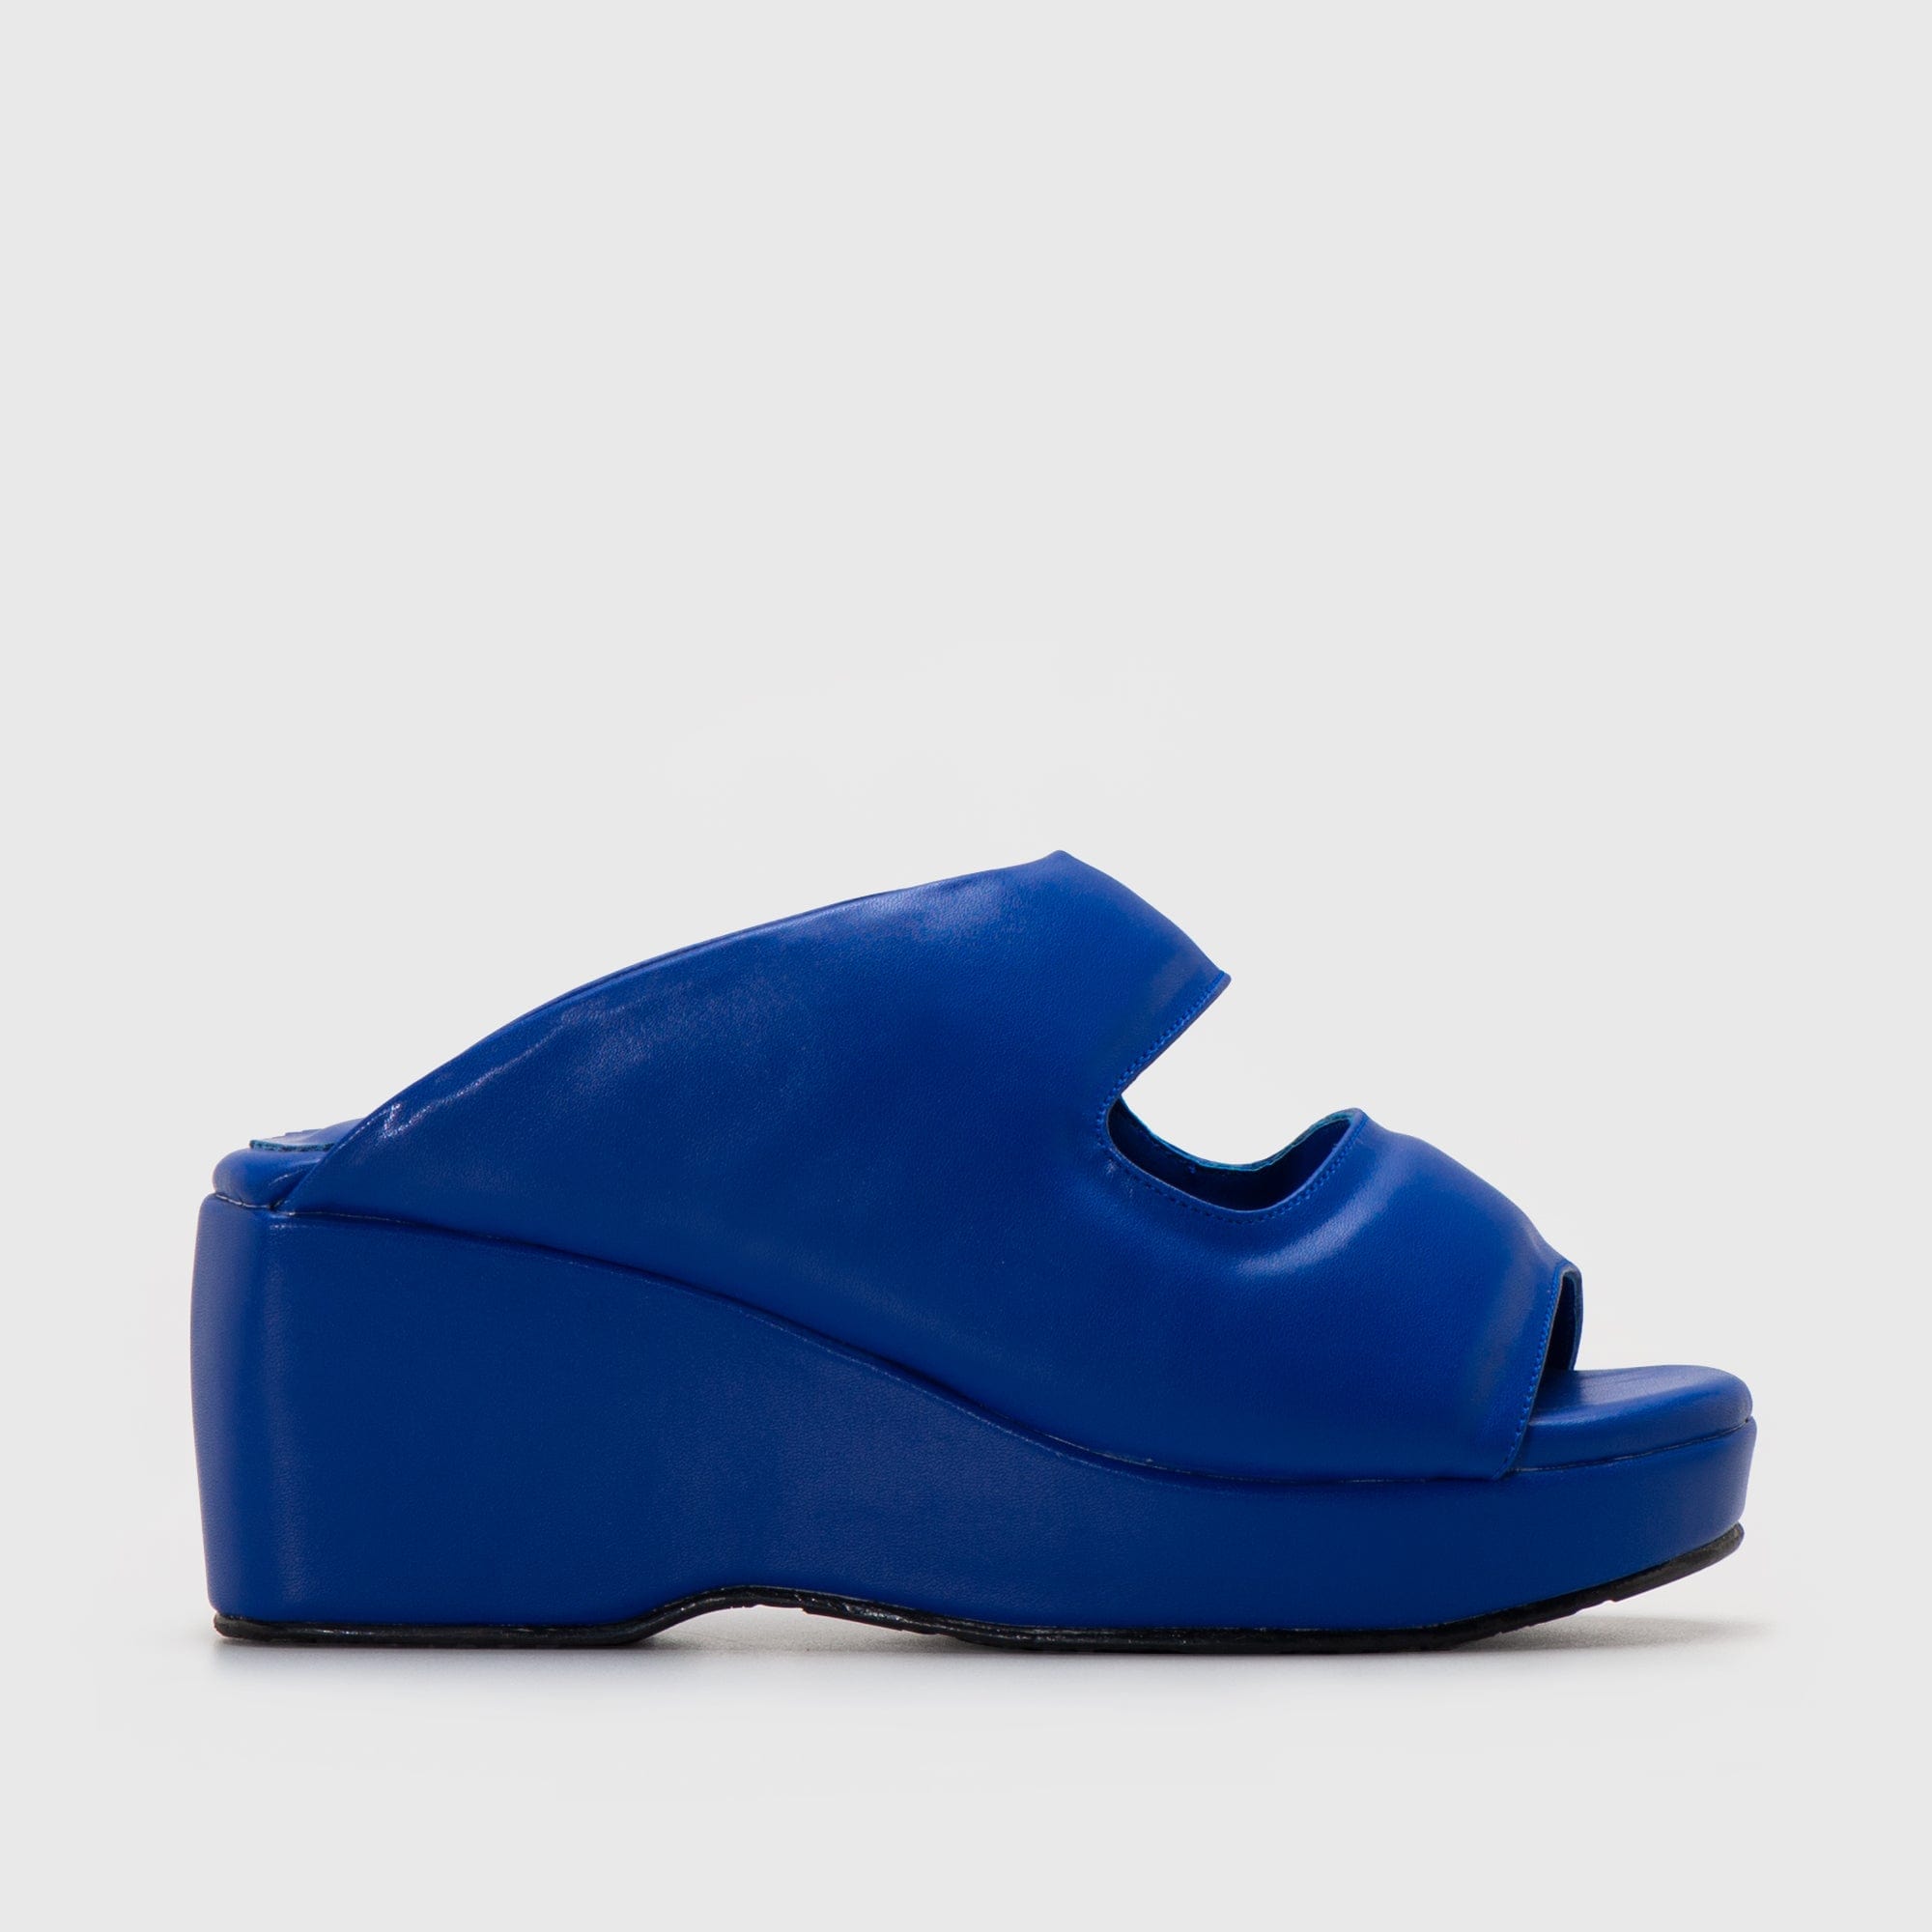 Adorable Projects Official Wedges Annecy Wedges Navy